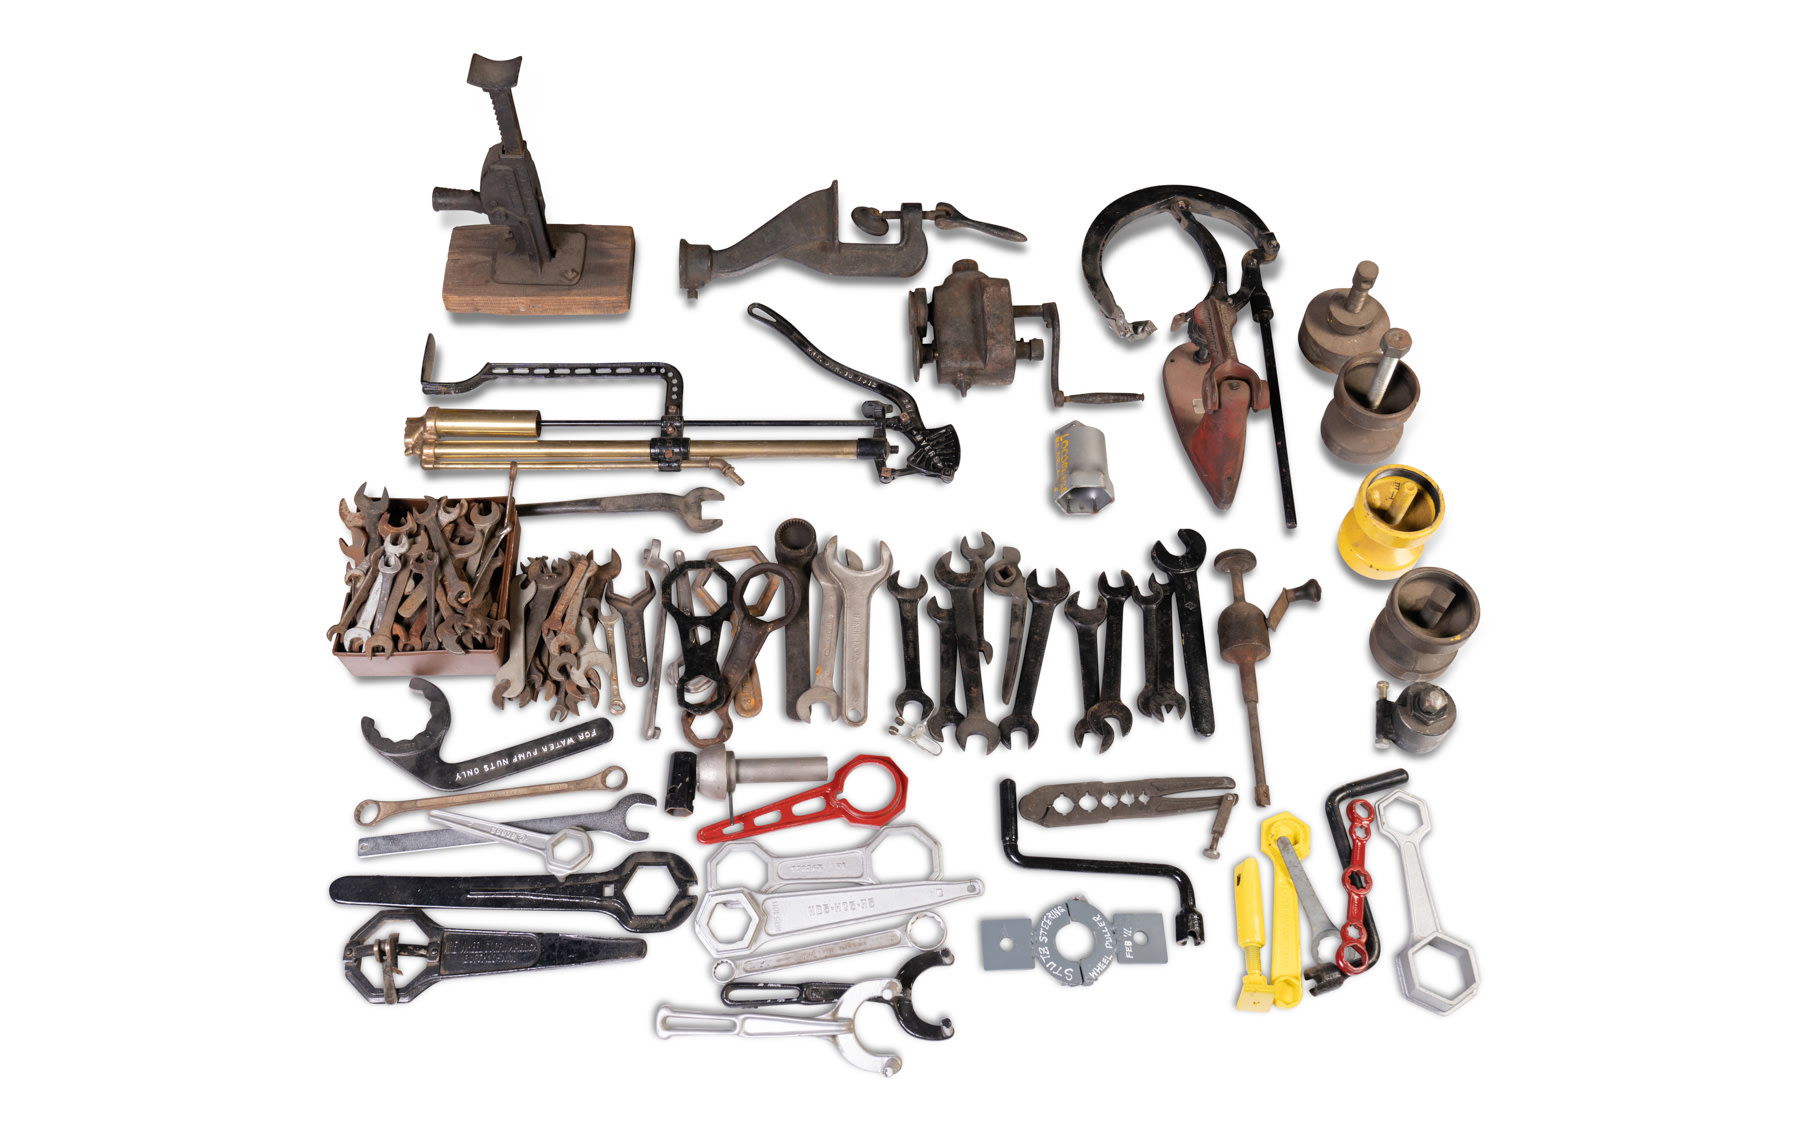 Assorted Specialty Tools